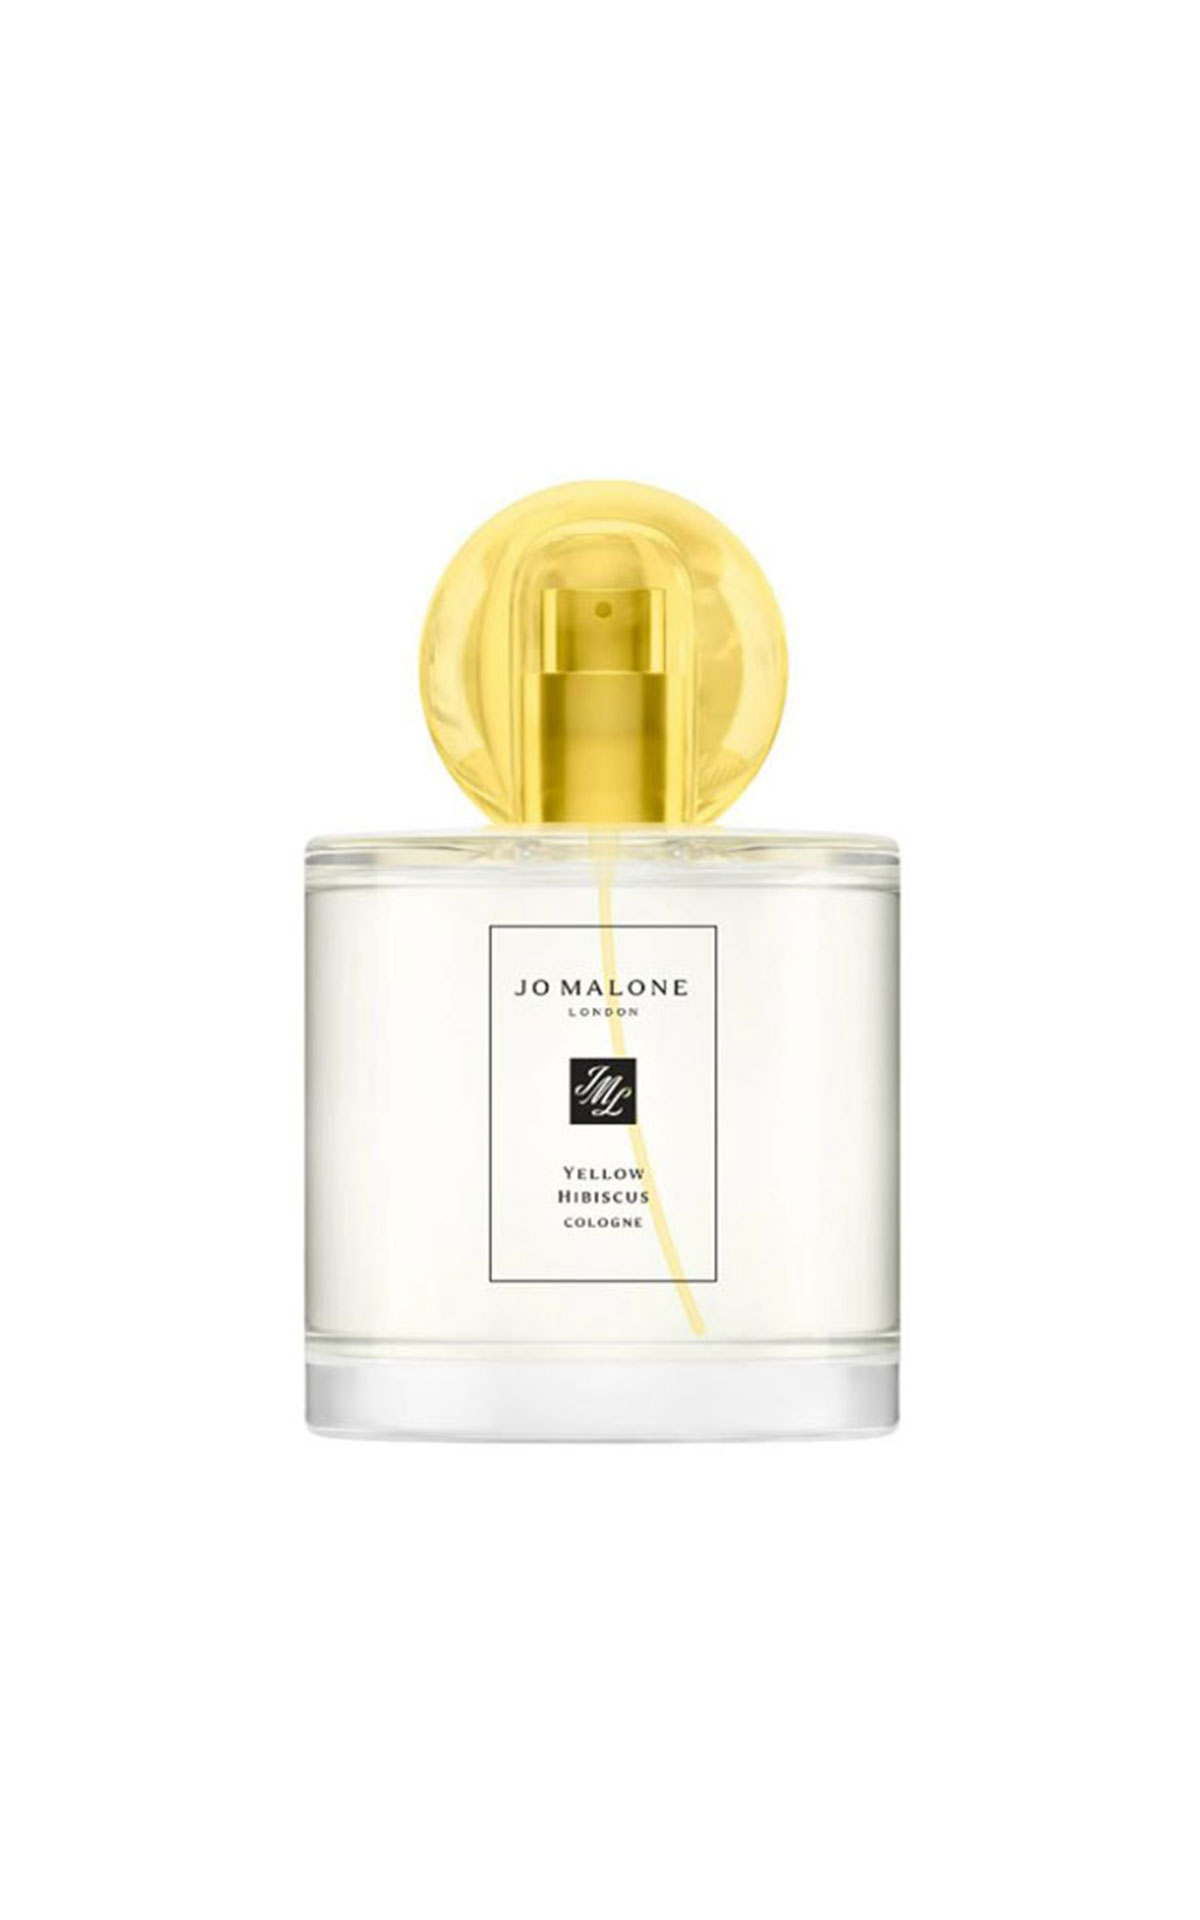 The Cosmetics Company Store Jo Malone London Yellow hibiscus cologne from Bicester Village